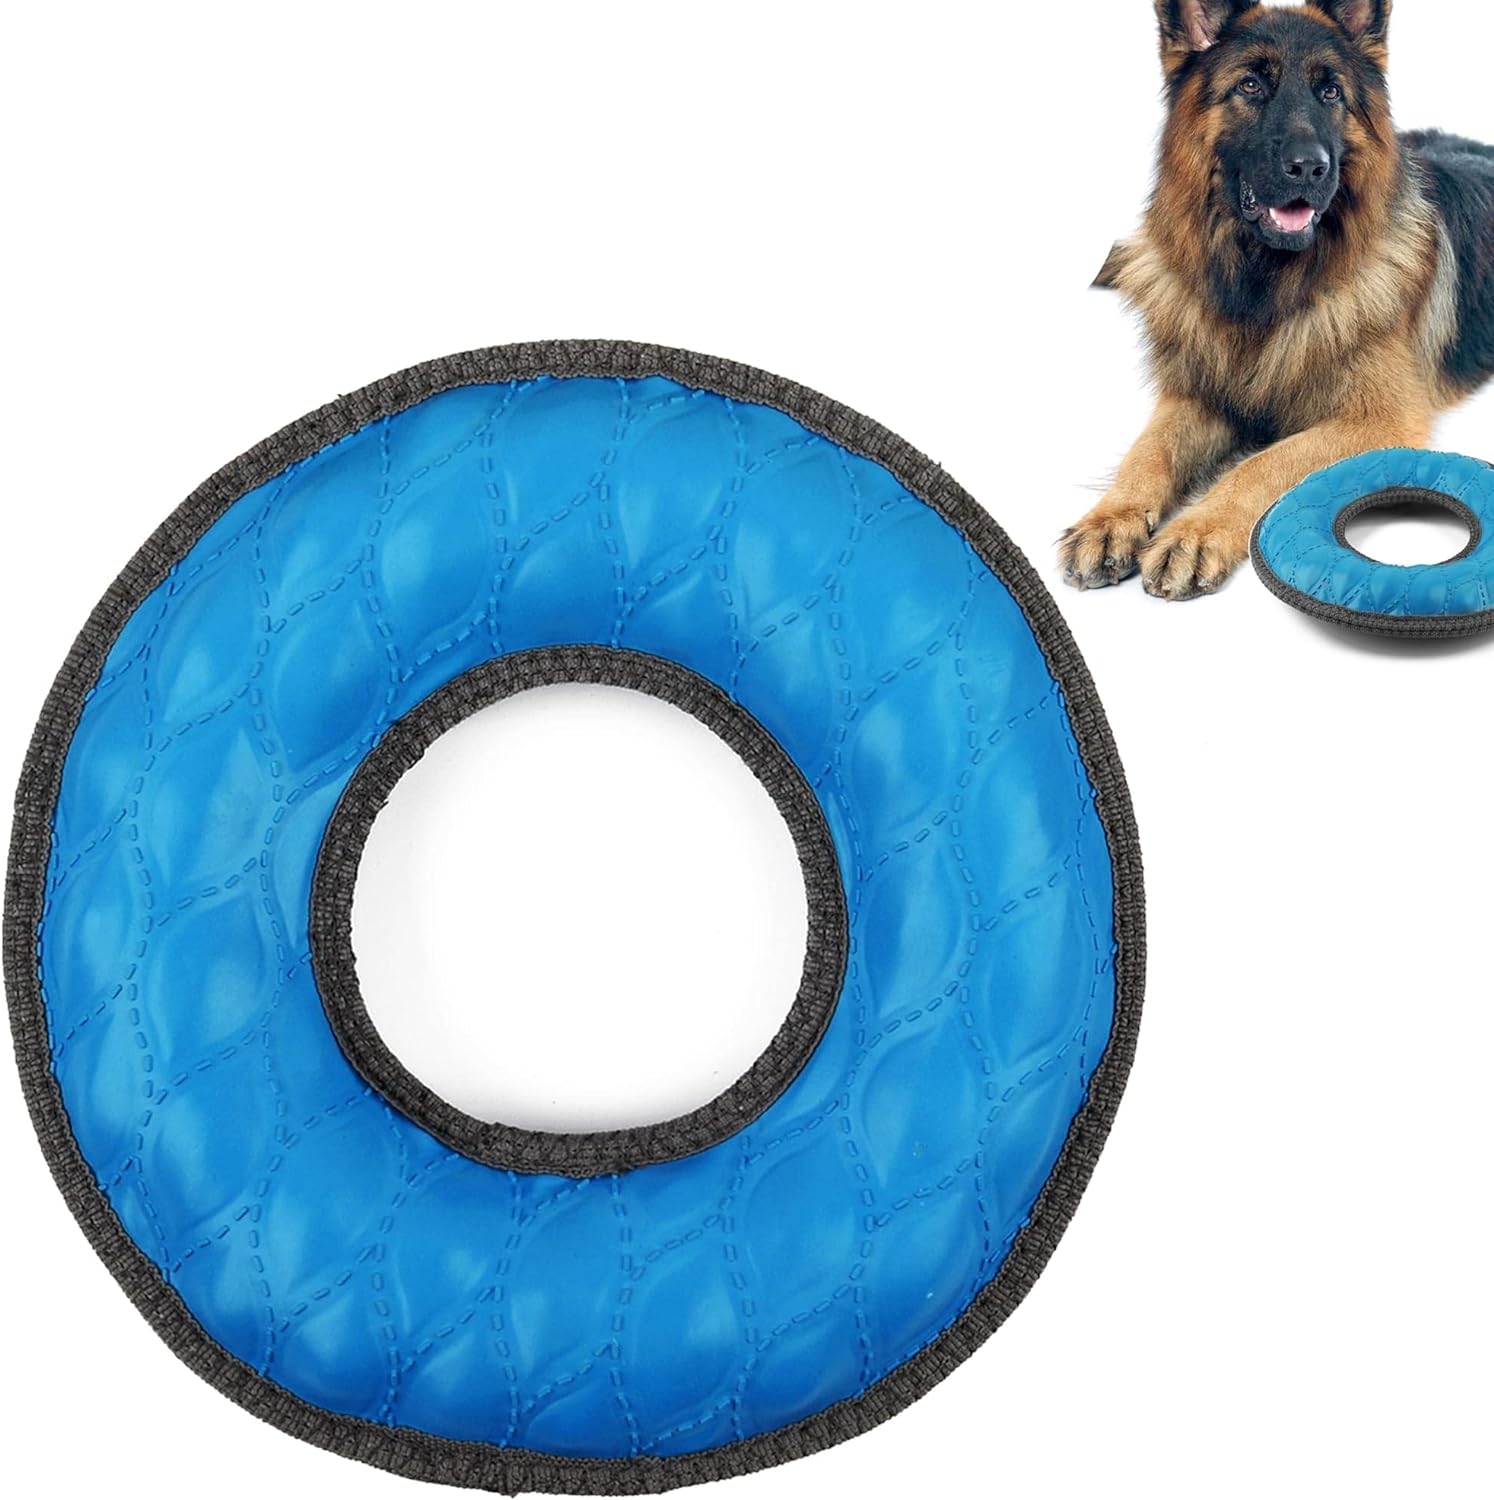 Cschome Dog Toys Cute Crocodile Floating Water Spray Dog Interactive Toy for Aggressive Chewers, Durable Interactive Dog Toy for Small to Large Dog